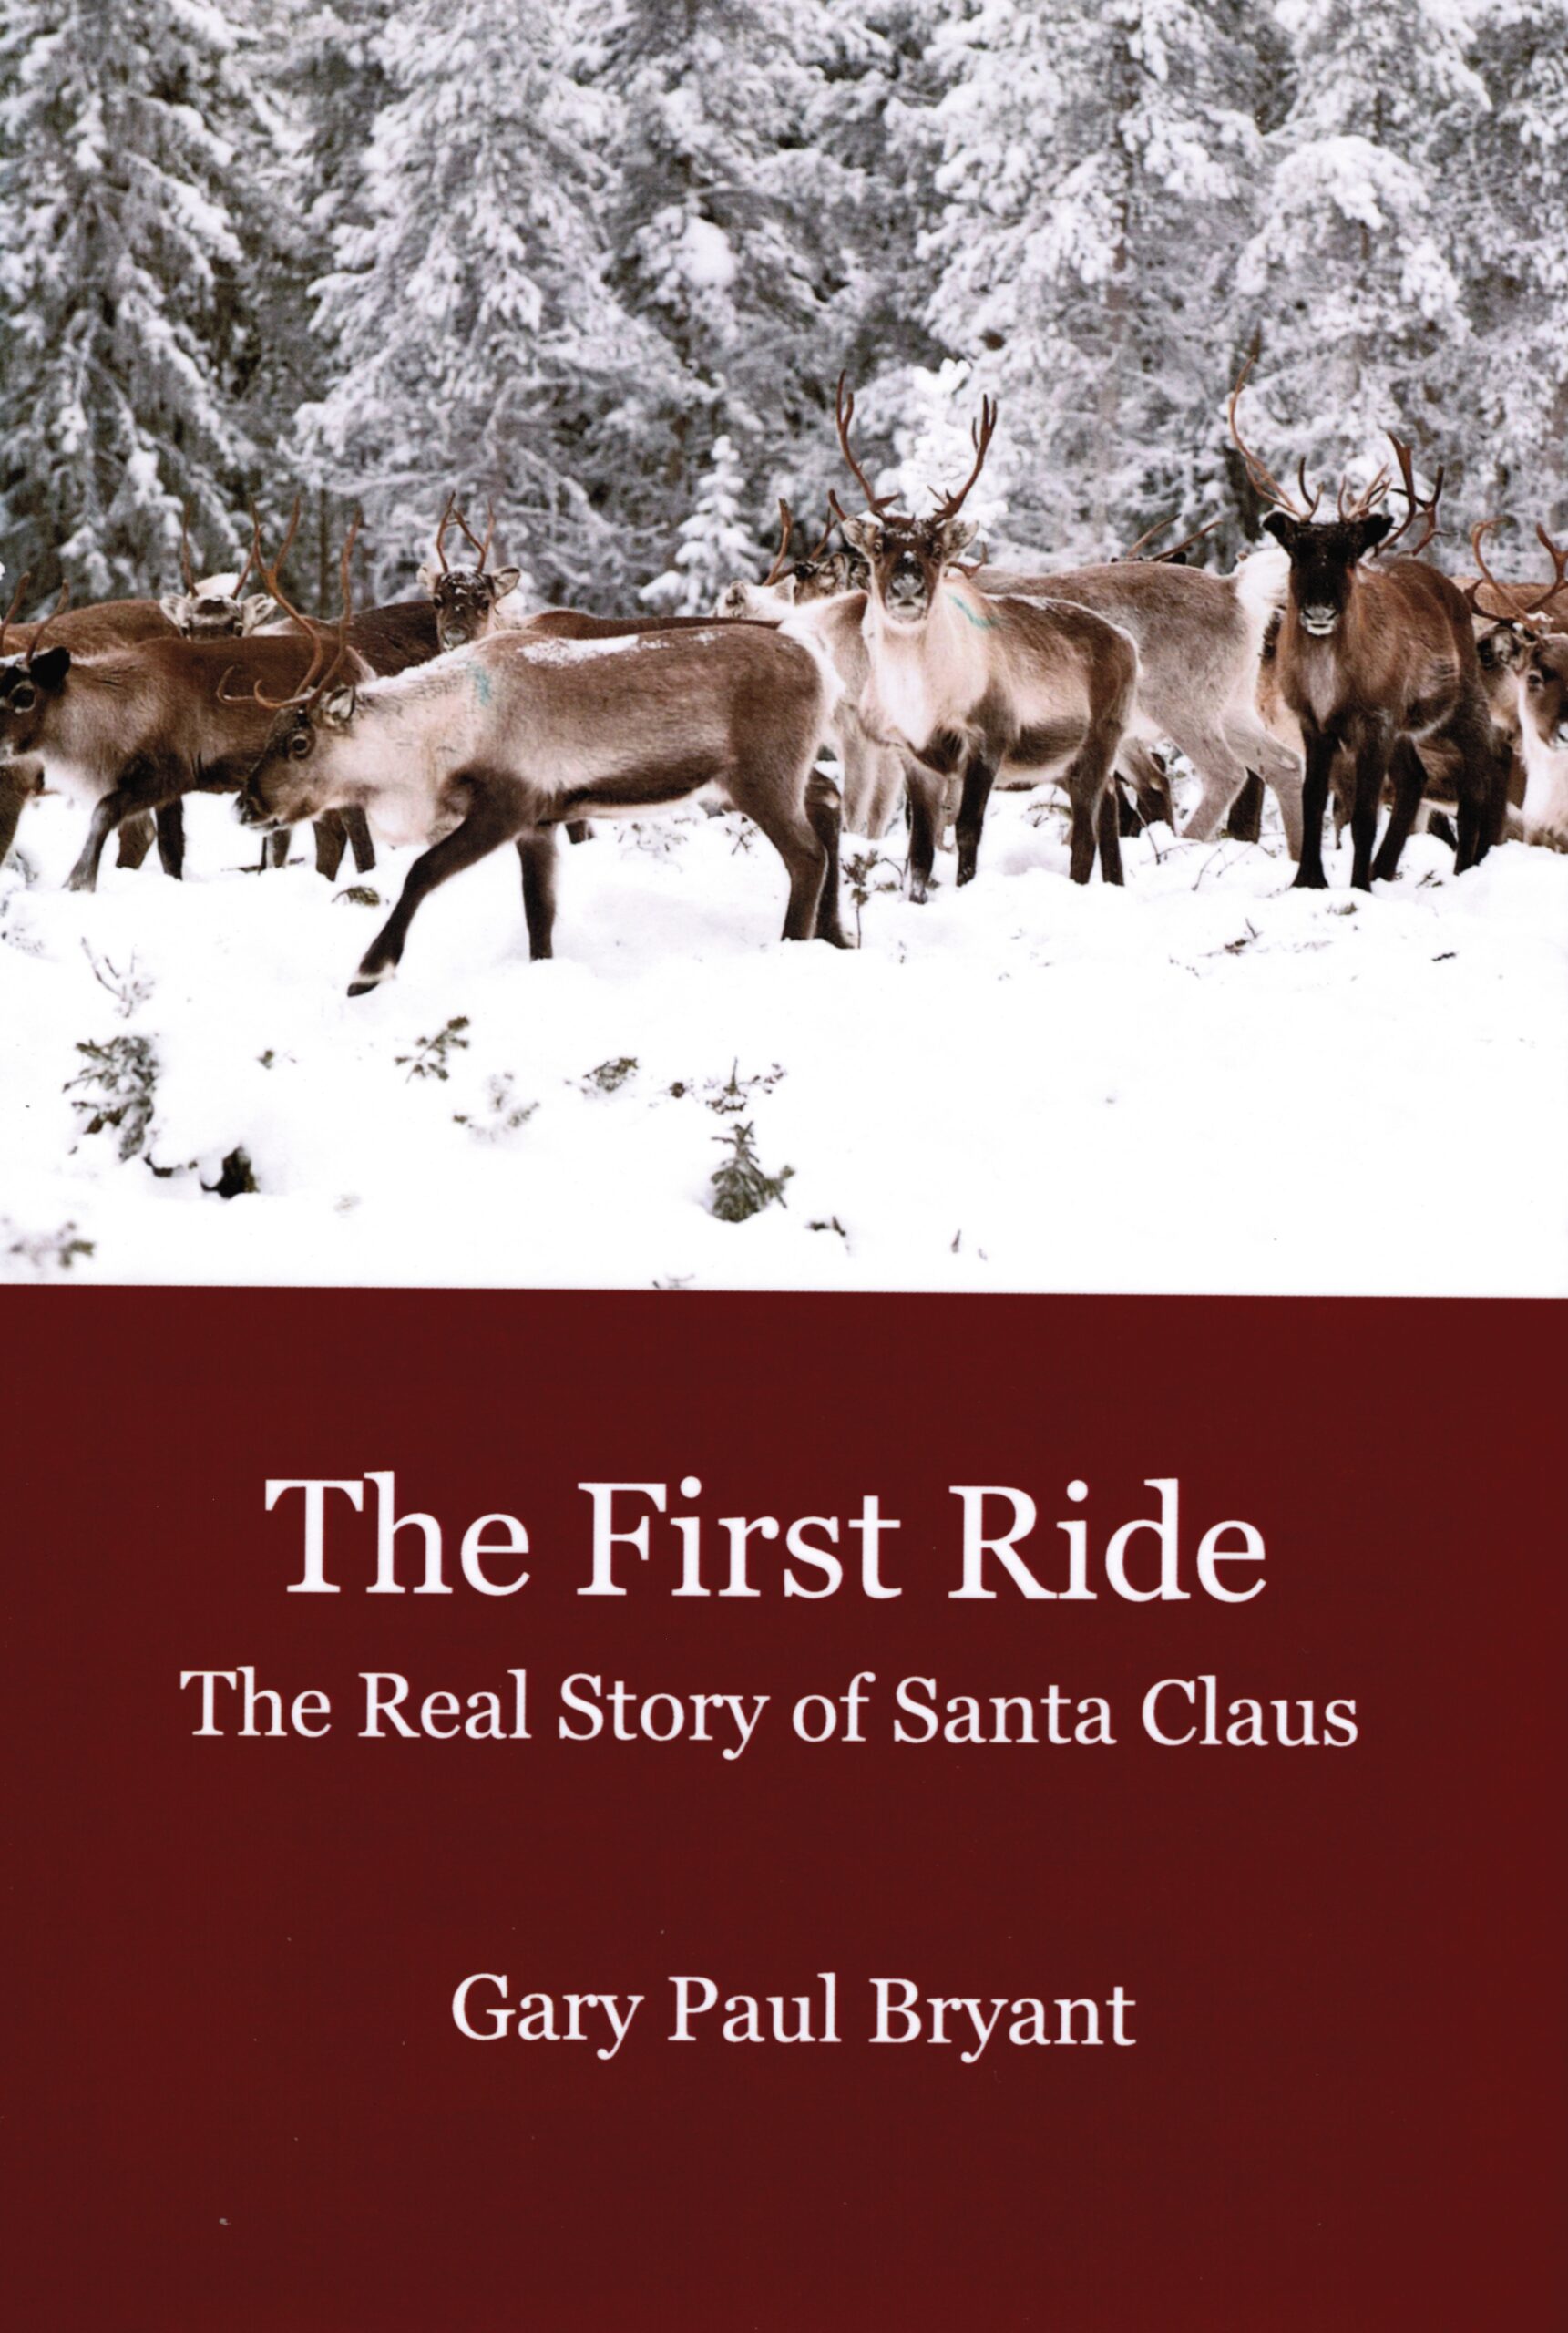 FREE: The First Ride: The Real Story of Santa Claus by Gary Paul Bryant